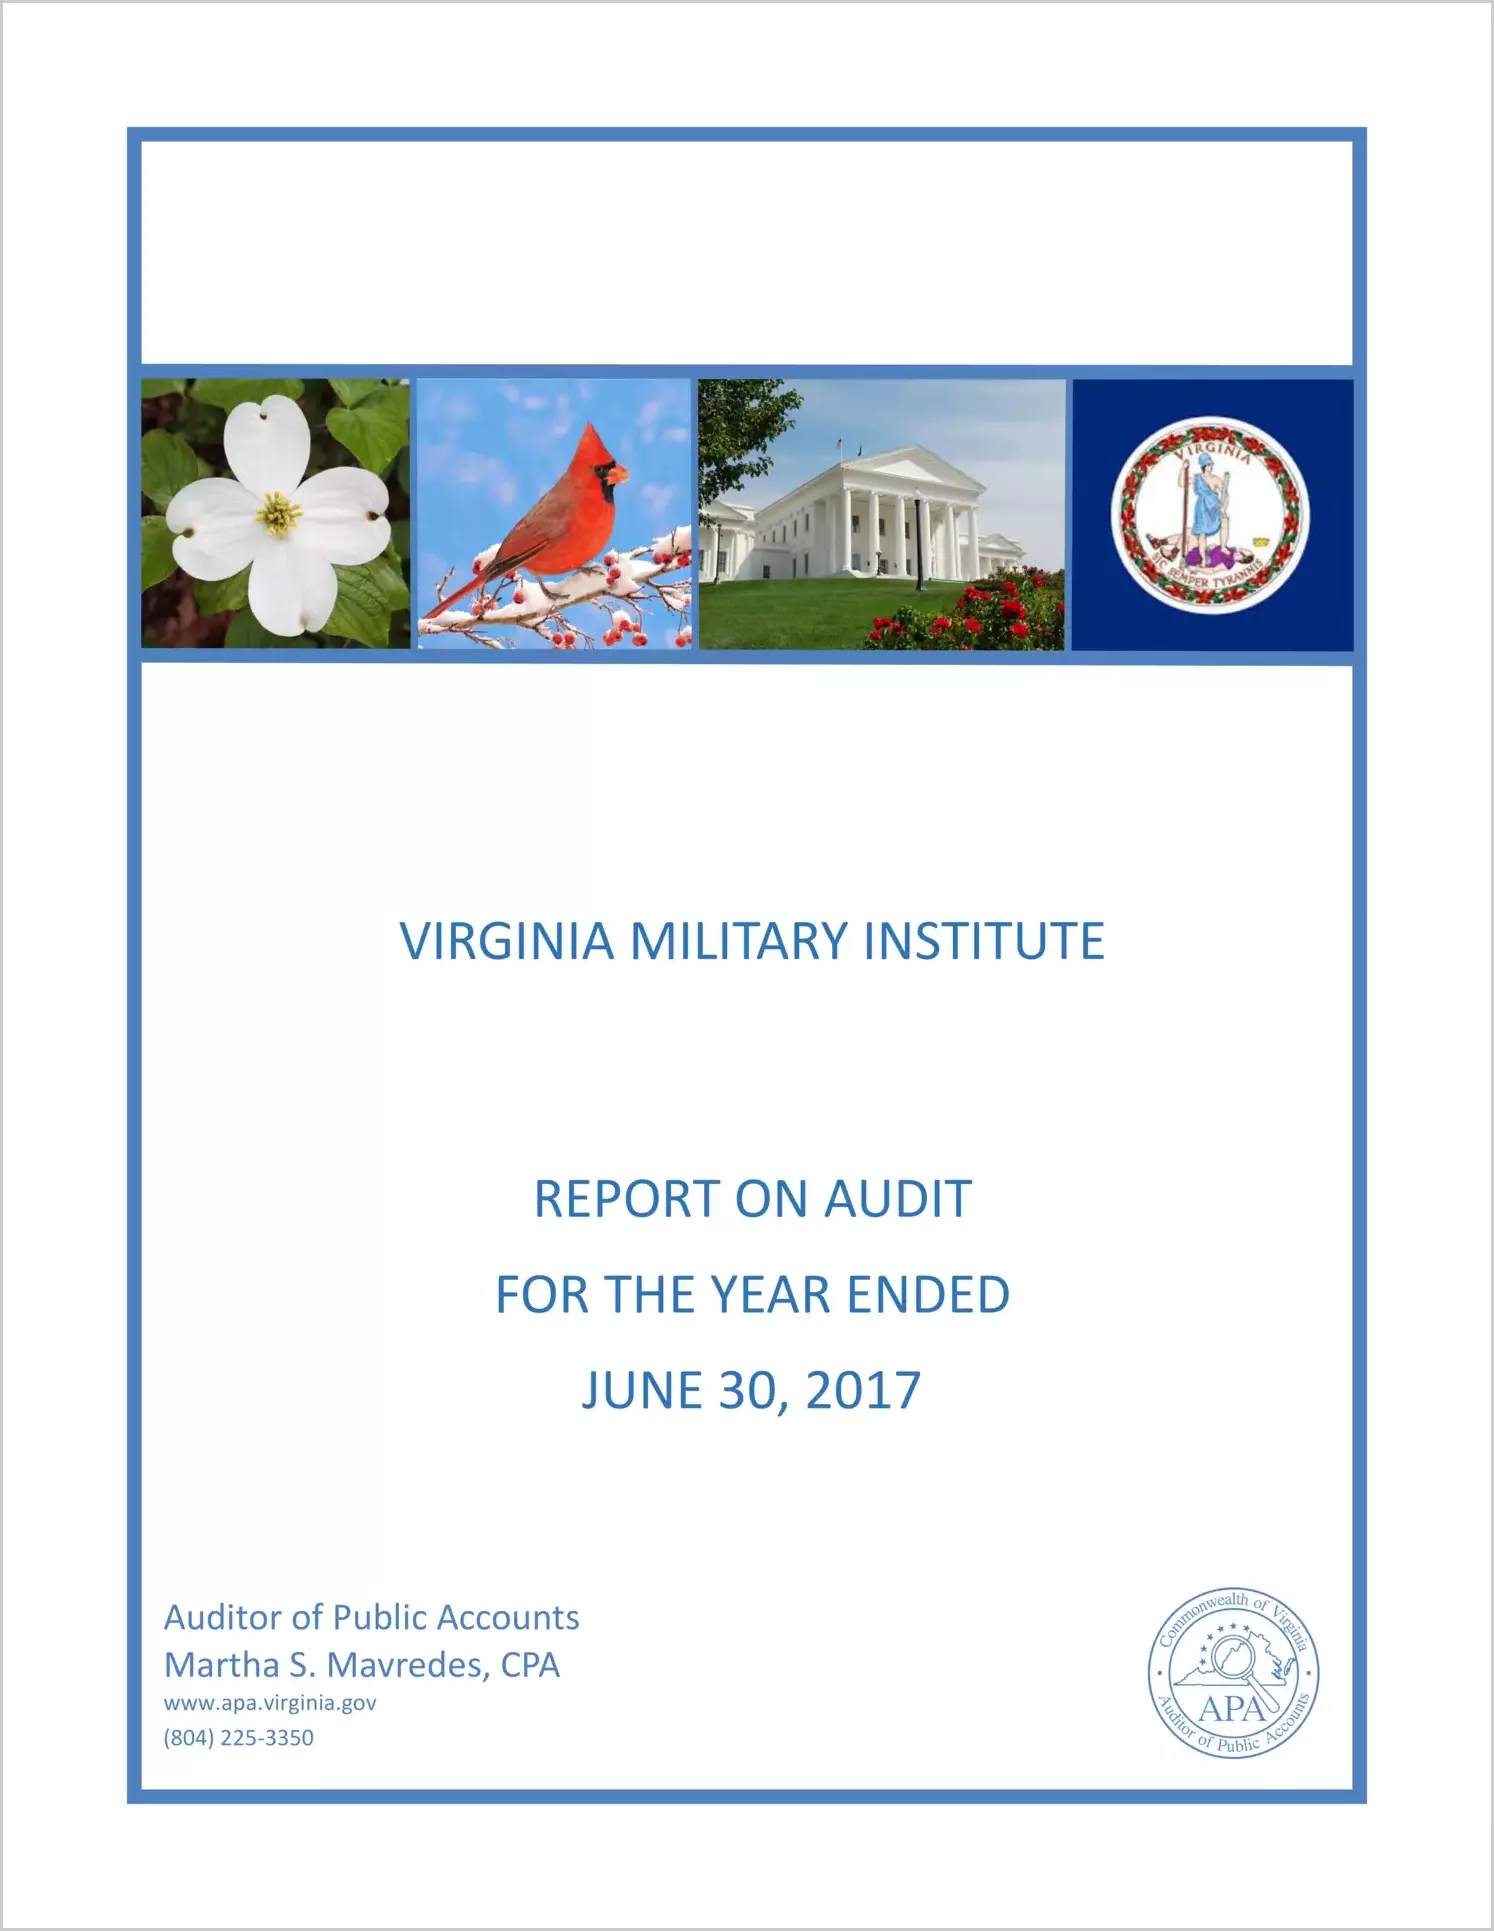 Virginia Military Institute for the year ended June 30, 2017